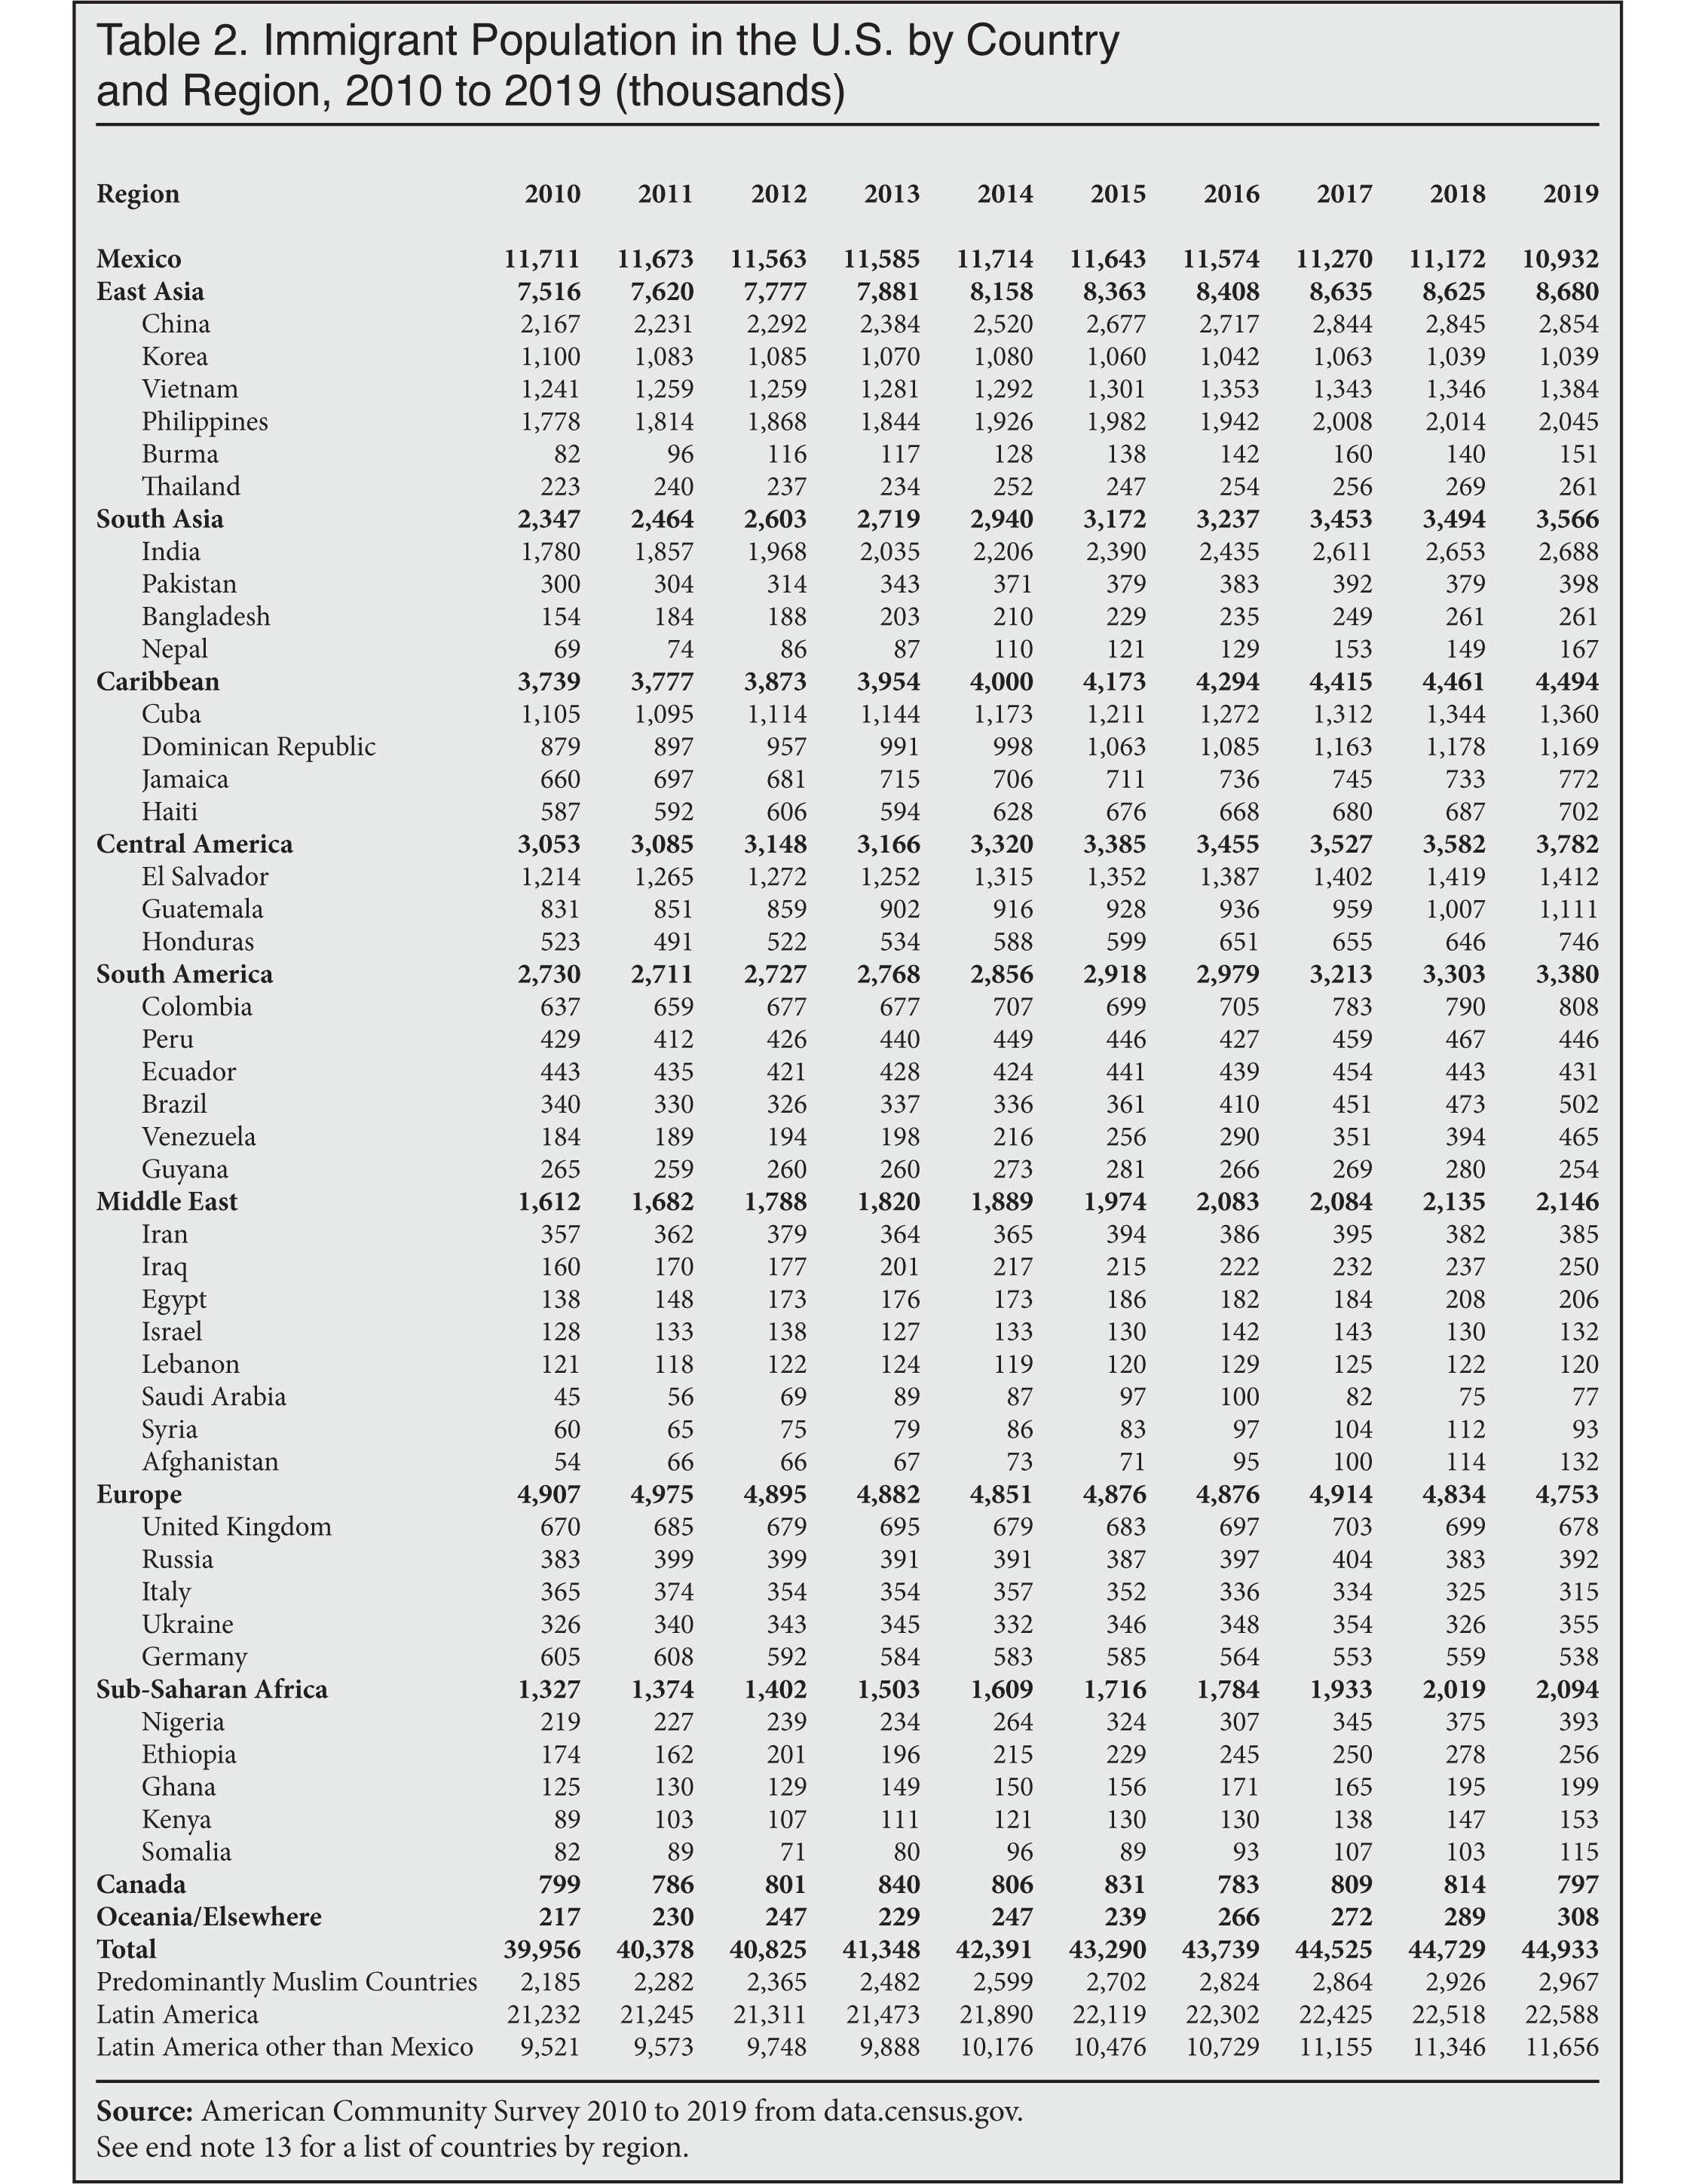 Table: Immigrant Population in the US by Country and Region, 2010 to 2019